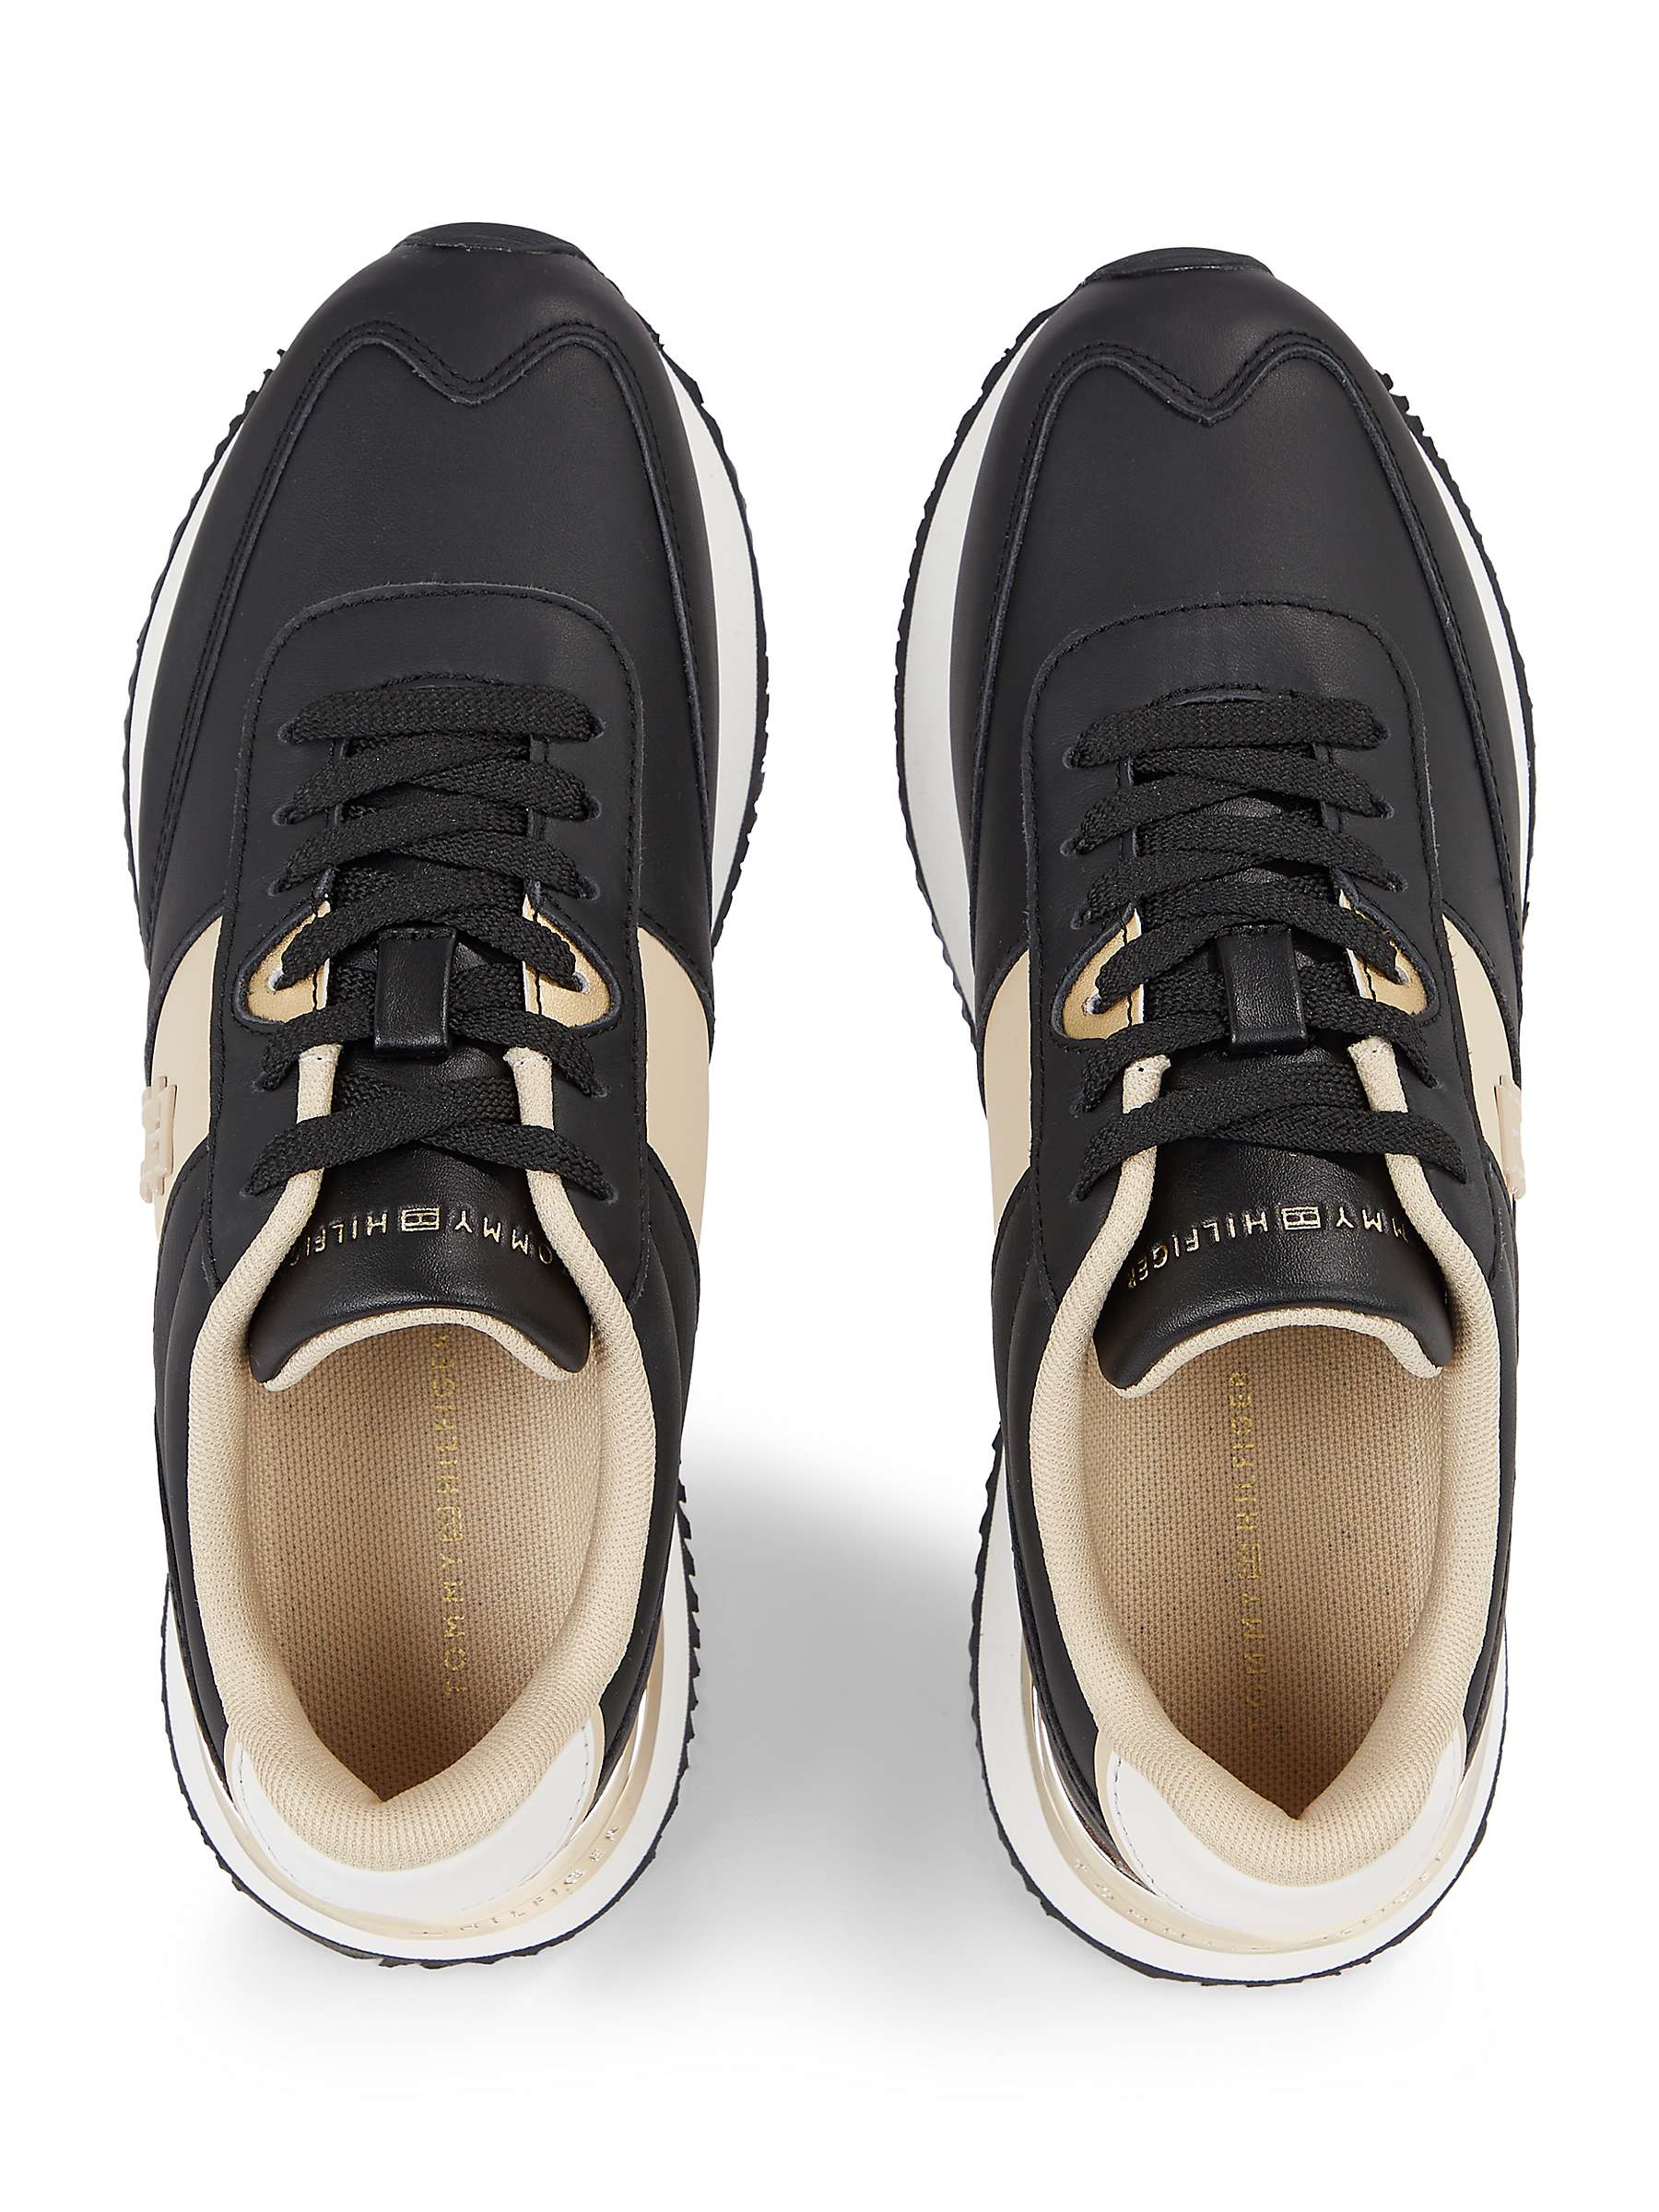 Buy Tommy Hilfiger TH Elevated Feminine Trainers Online at johnlewis.com